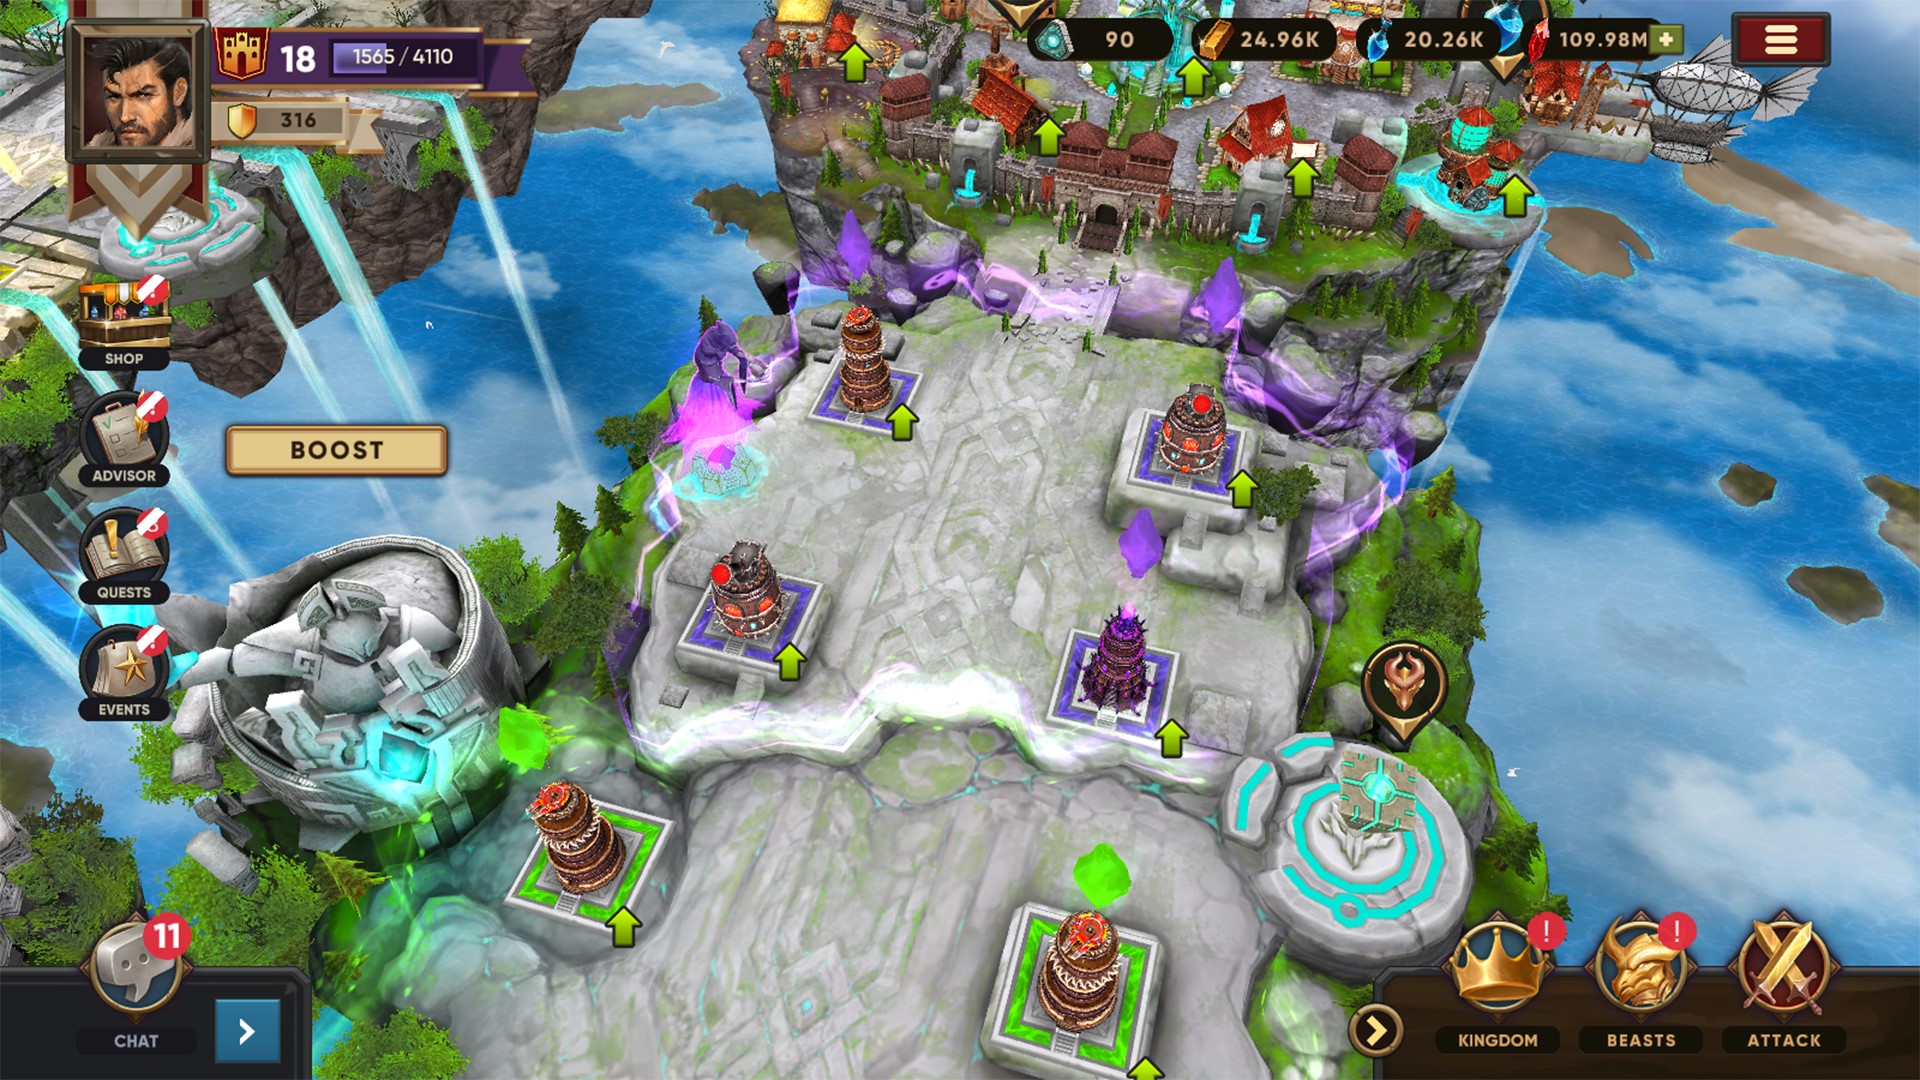 Tower Defense Clash 🕹️ Play on CrazyGames